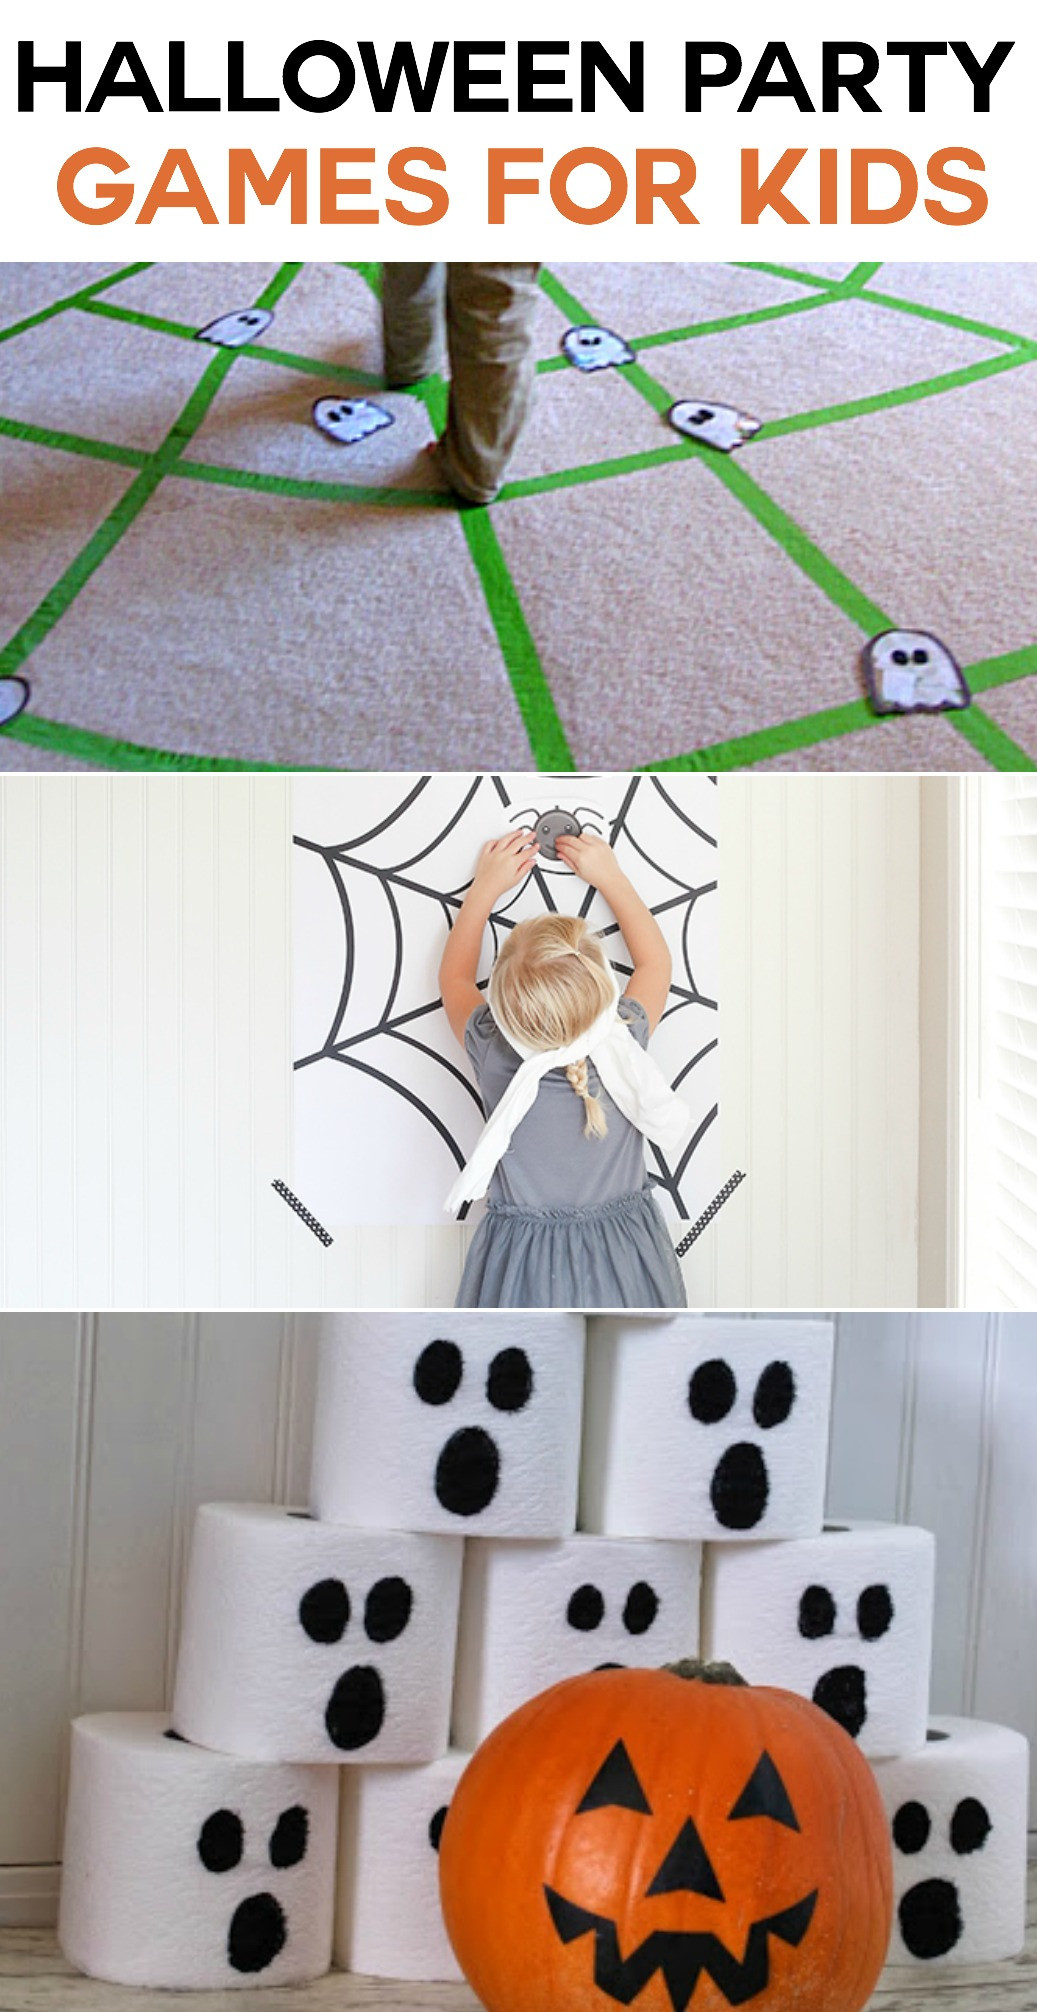 Fun Ideas For Children'S Halloween Party
 Halloween Party Games